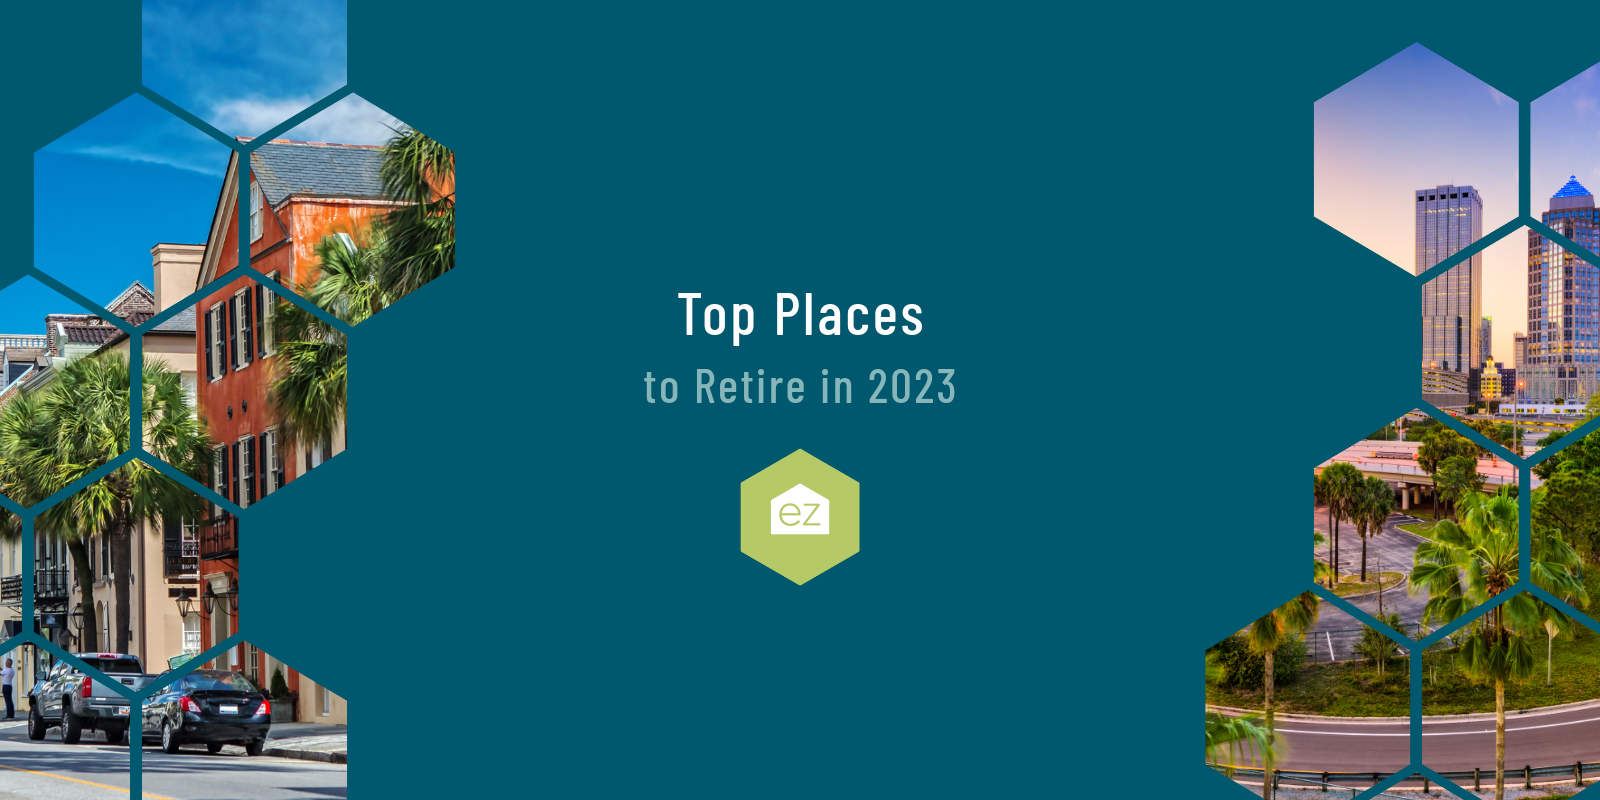 Best Retirement Places to Live in 2023